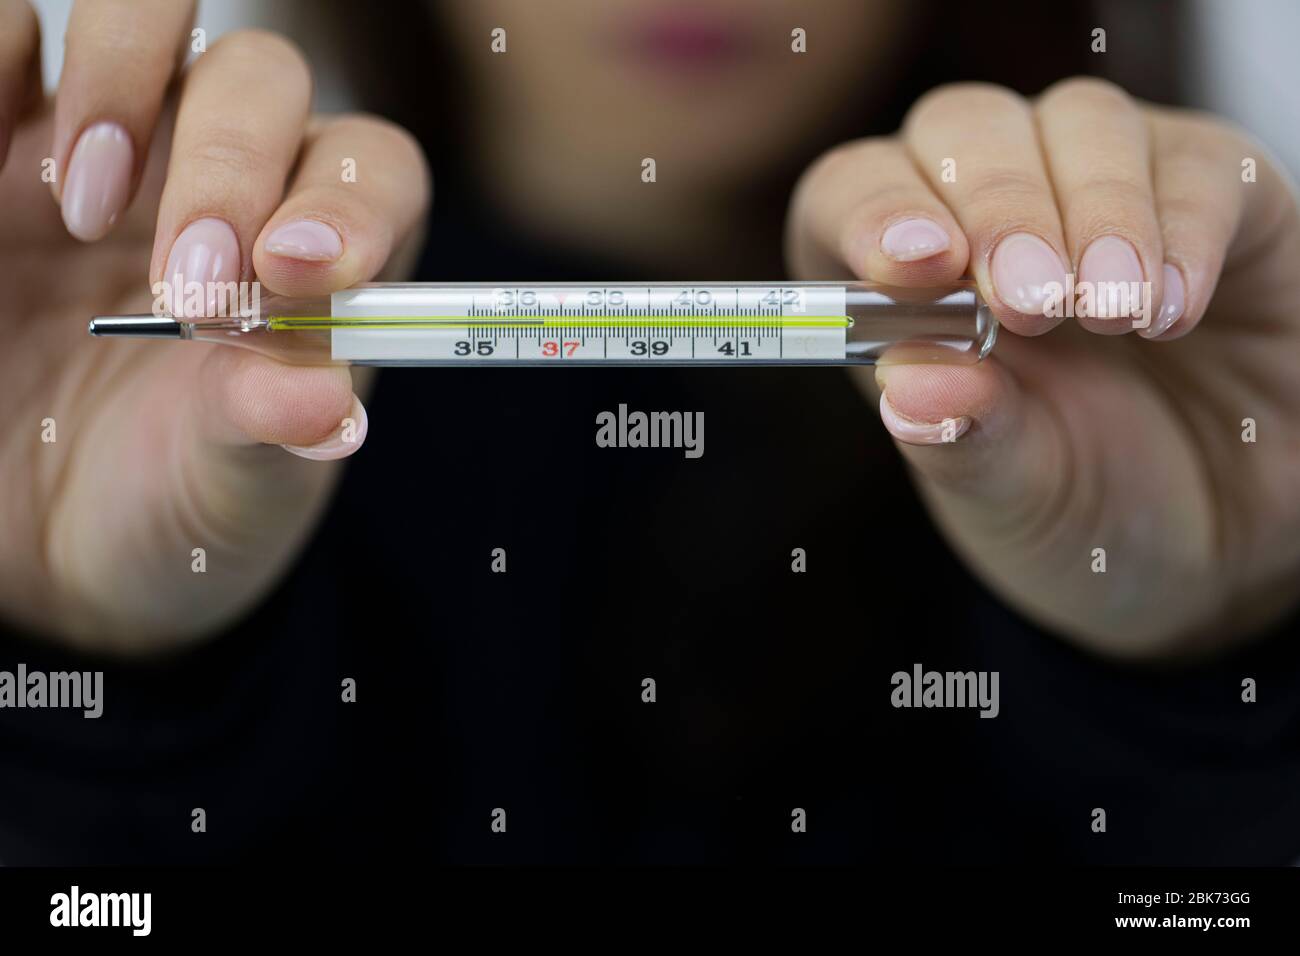 https://c8.alamy.com/comp/2BK73GG/girl-holds-medical-glass-thermometer-with-optimal-temperature-of-healthy-person-2BK73GG.jpg